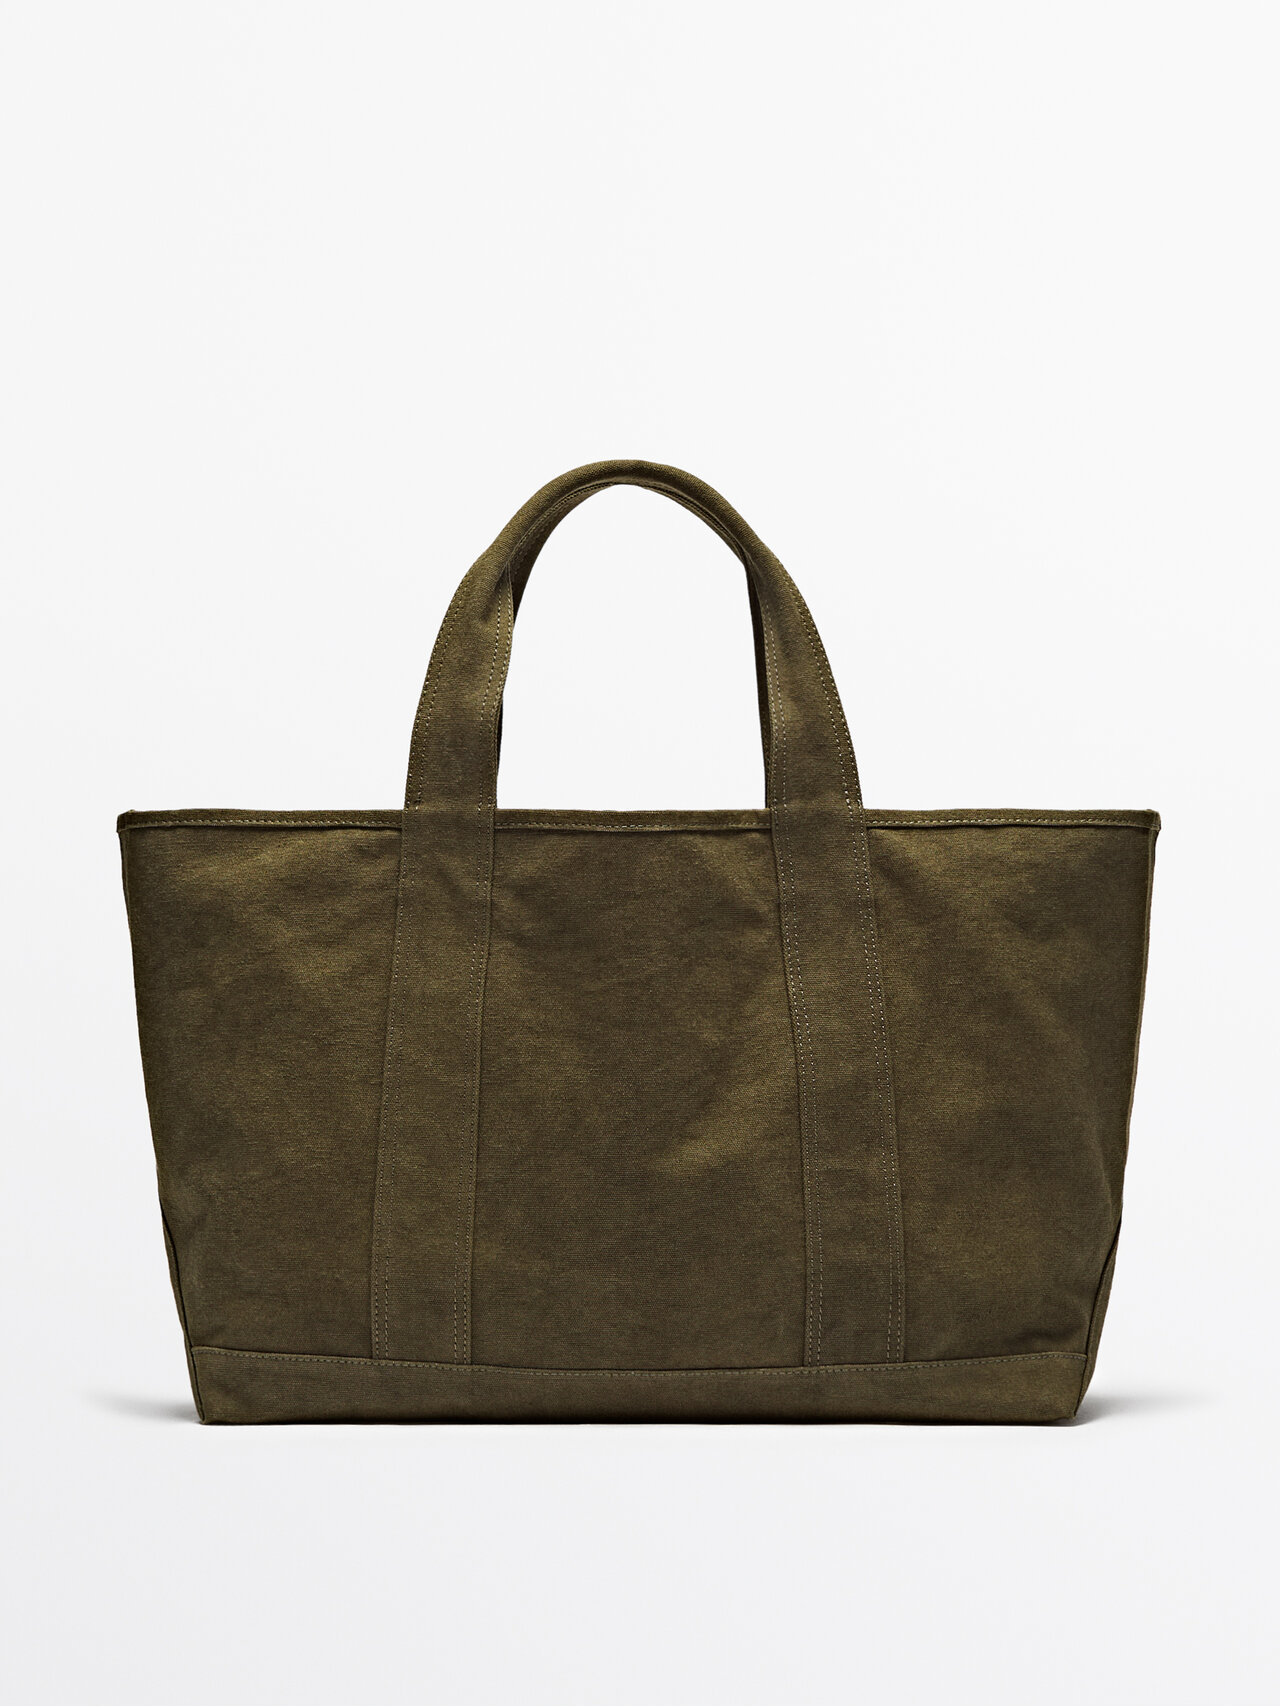 Massimo Dutti Dyed Canvas Shopper Bag In Brown